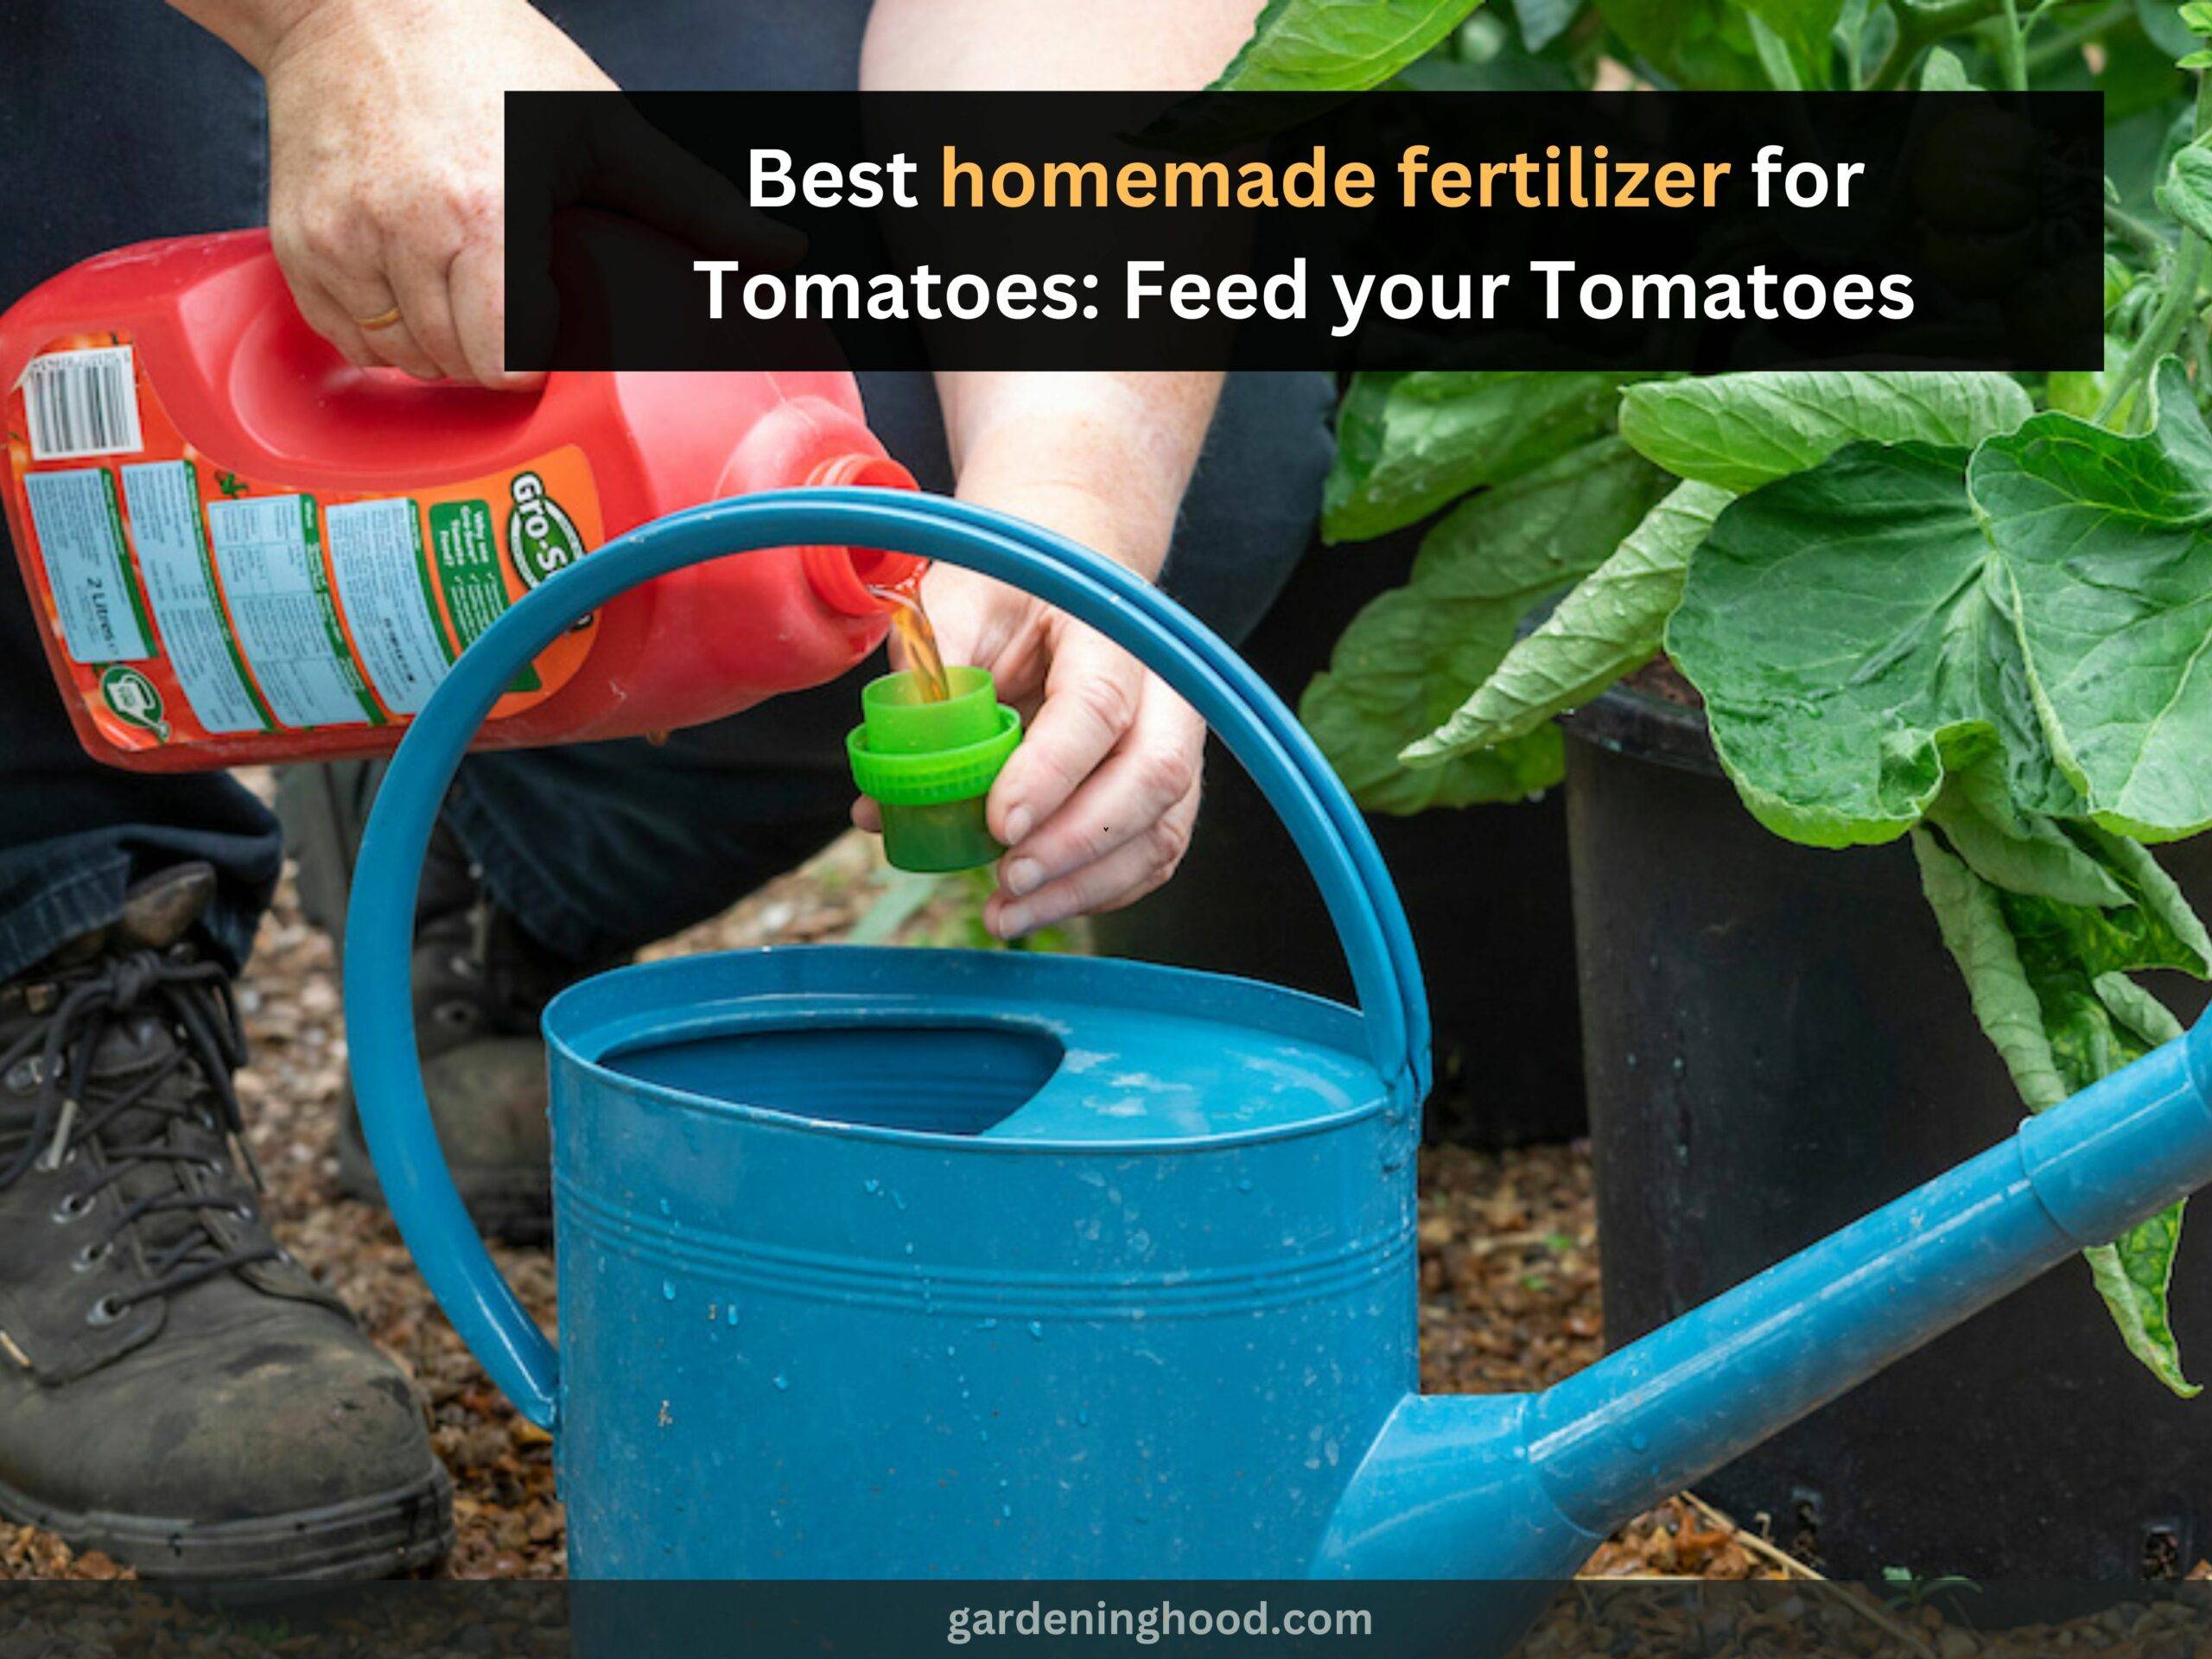 Best homemade fertilizer for Tomatoes: Feed your Tomatoes